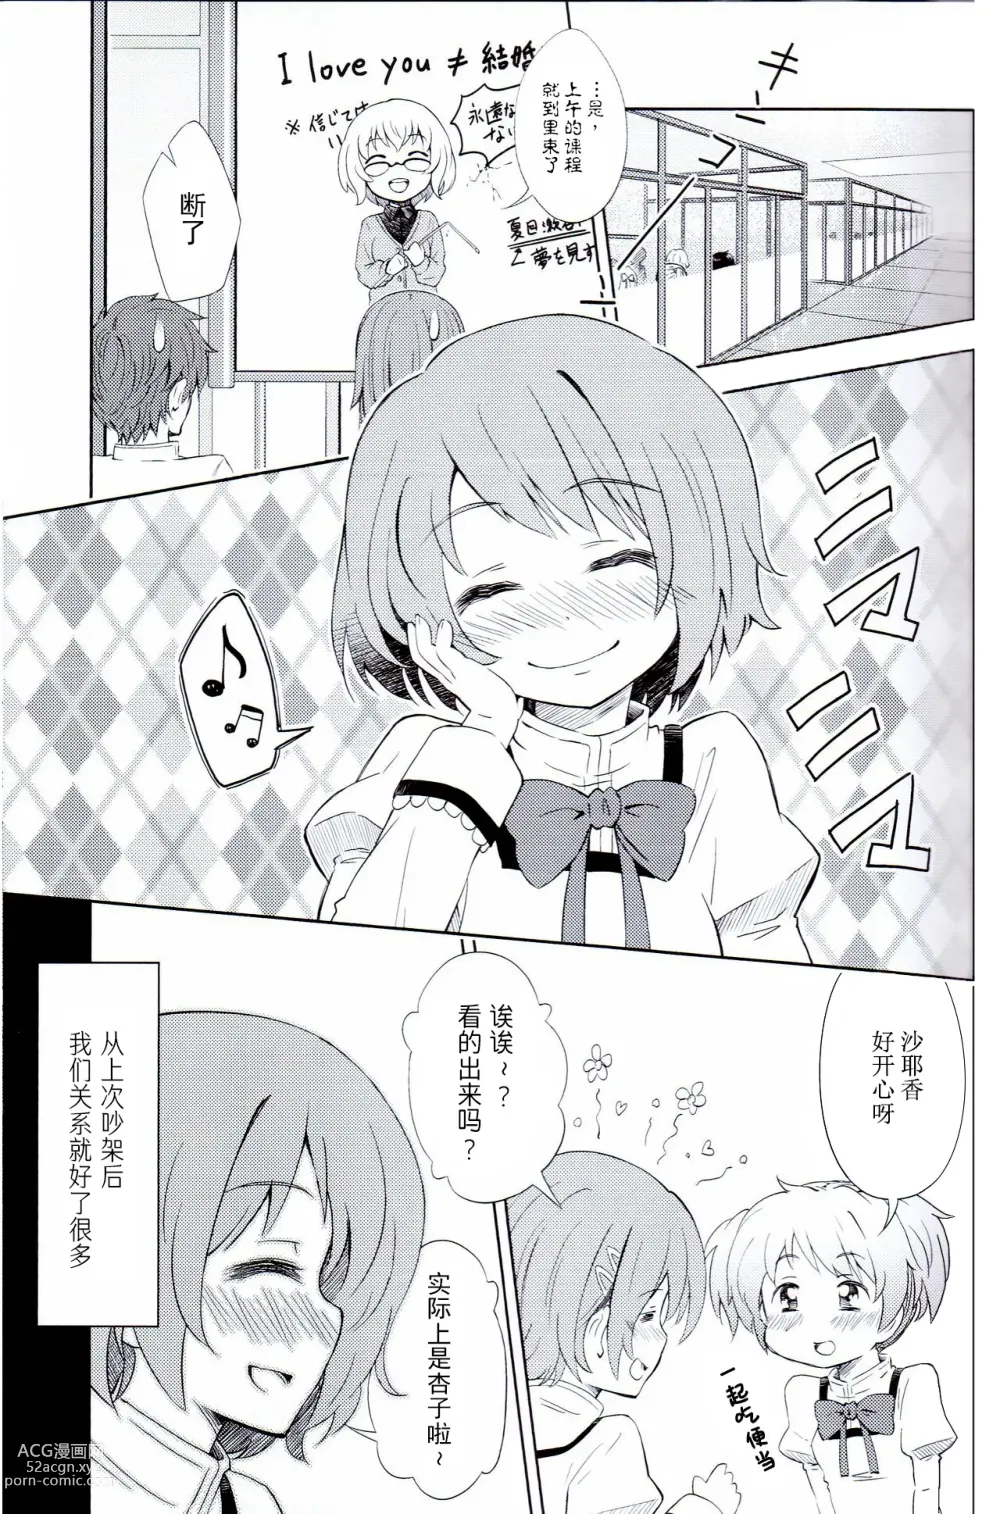 Page 4 of doujinshi Lovely Girls Lily vol. 5